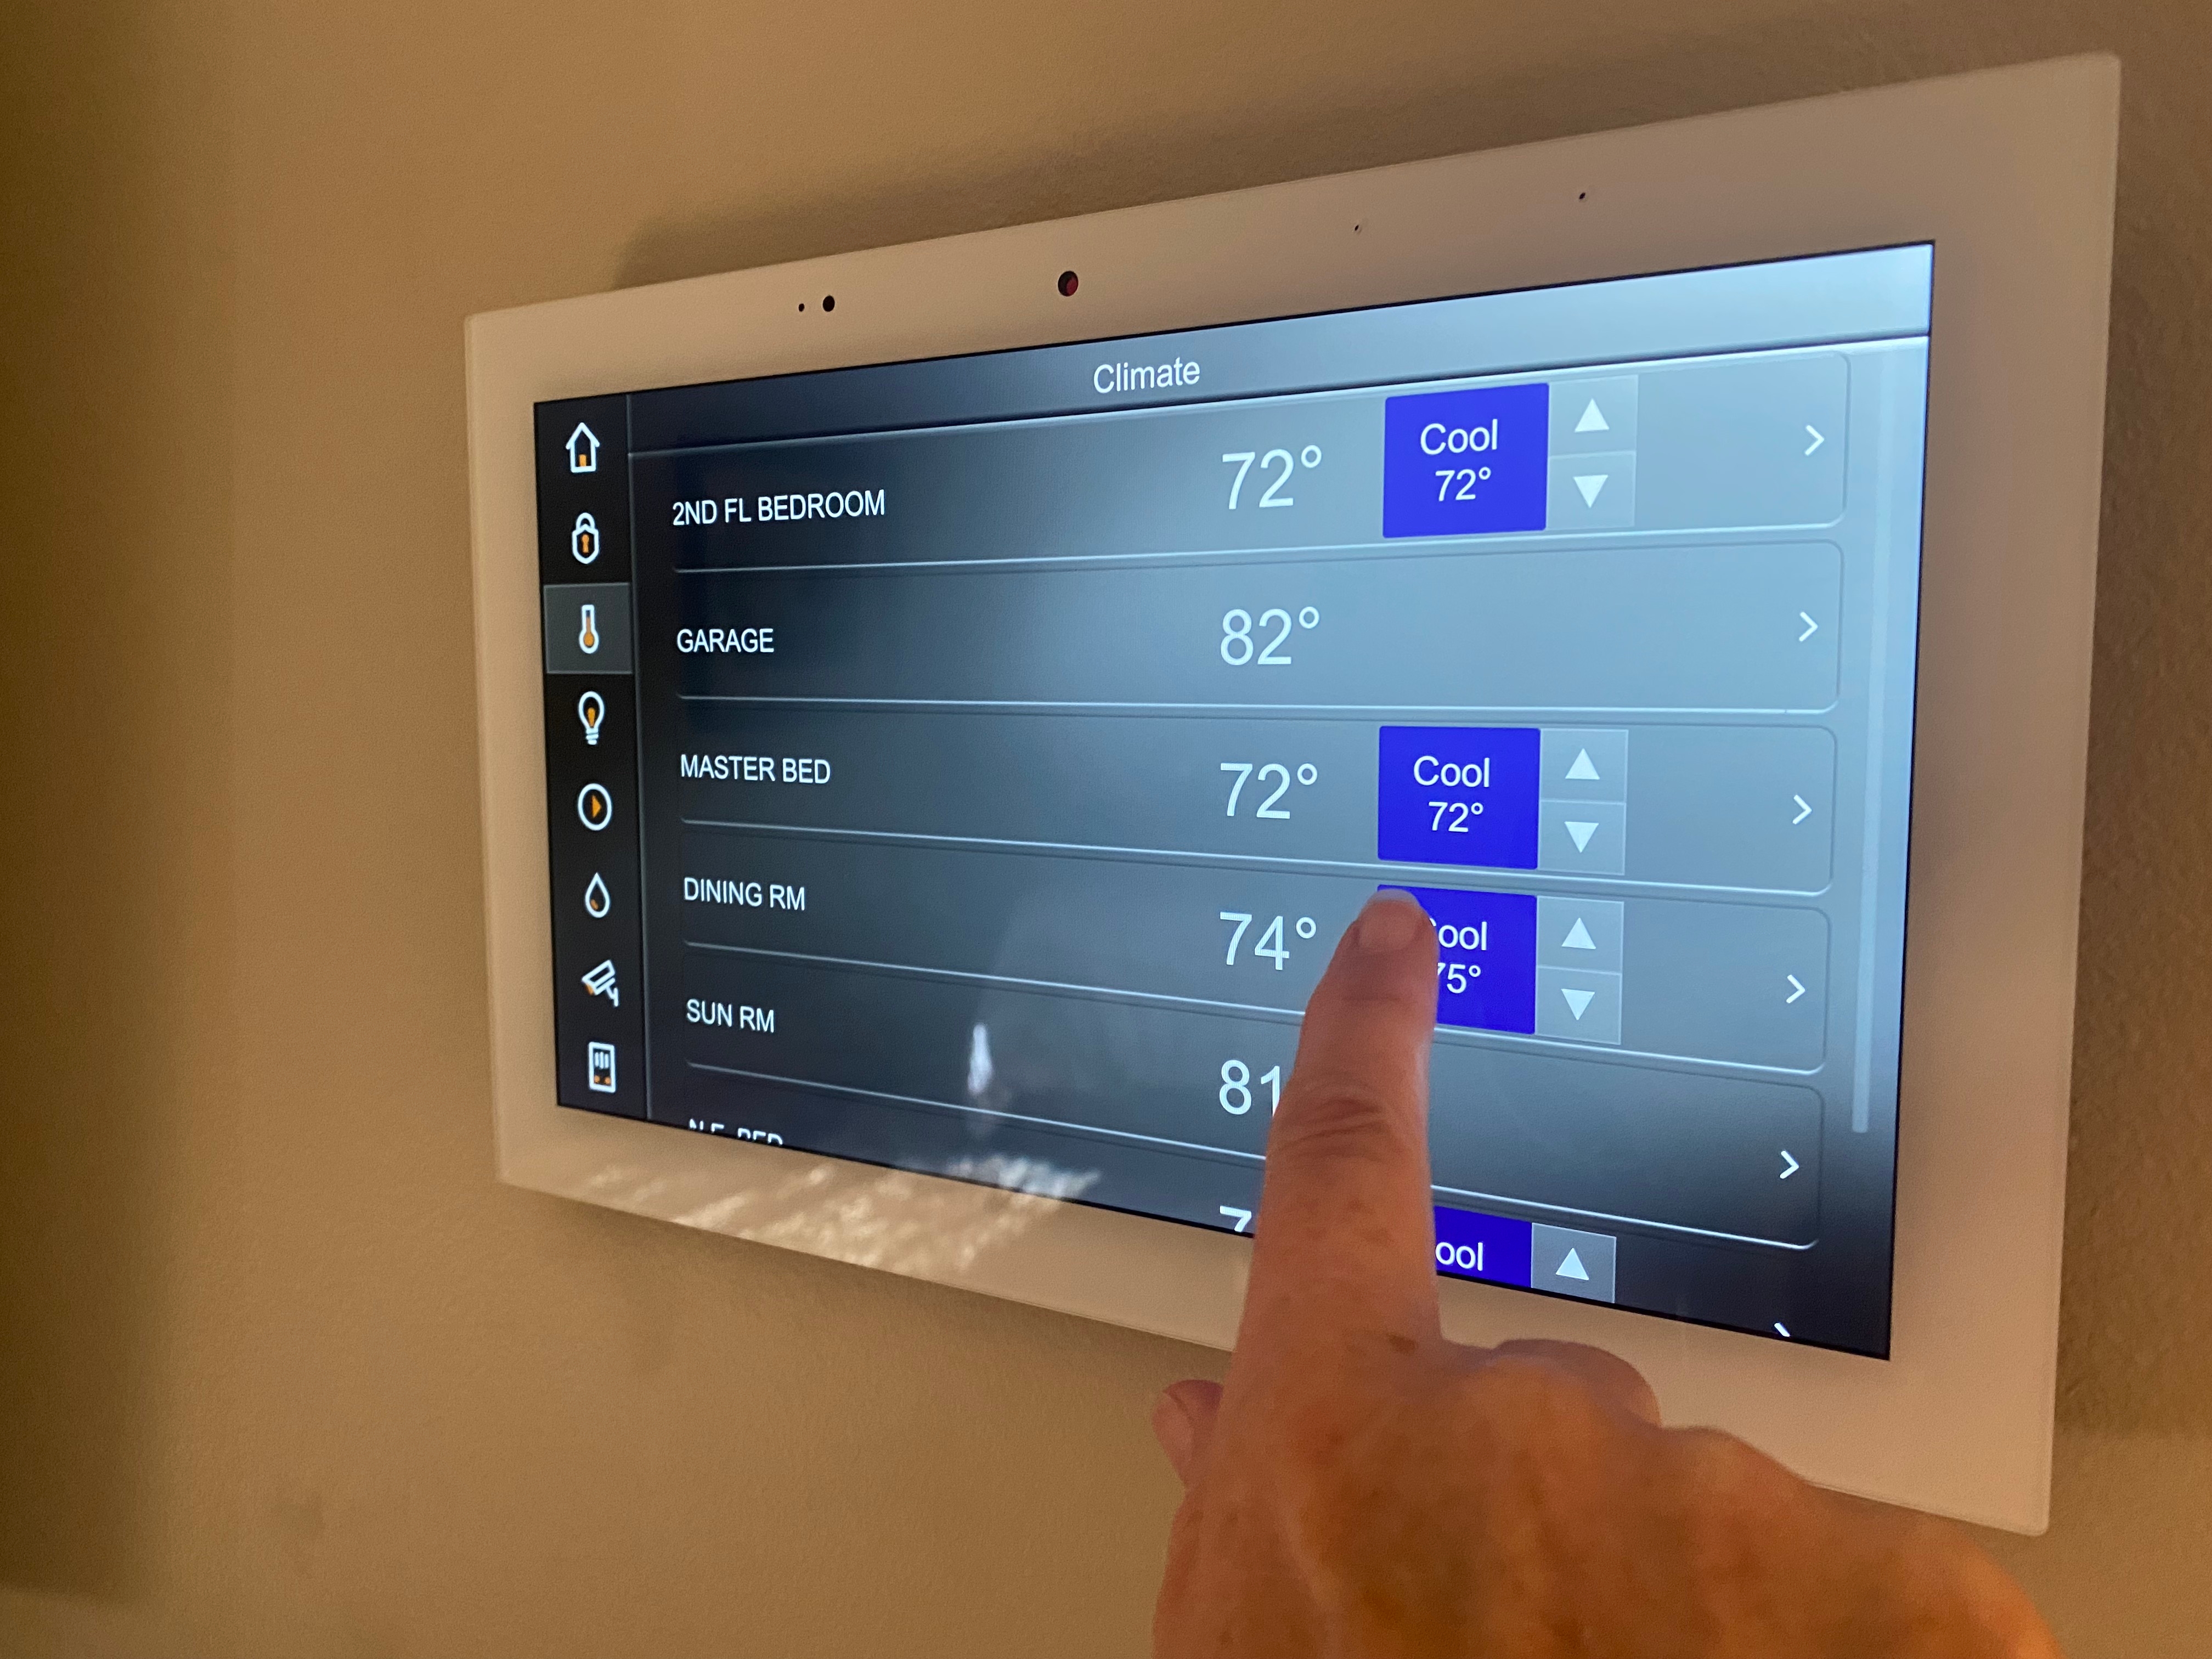 Residential Light & Temperature Control Systems | Security Systems Las Vegas, NV